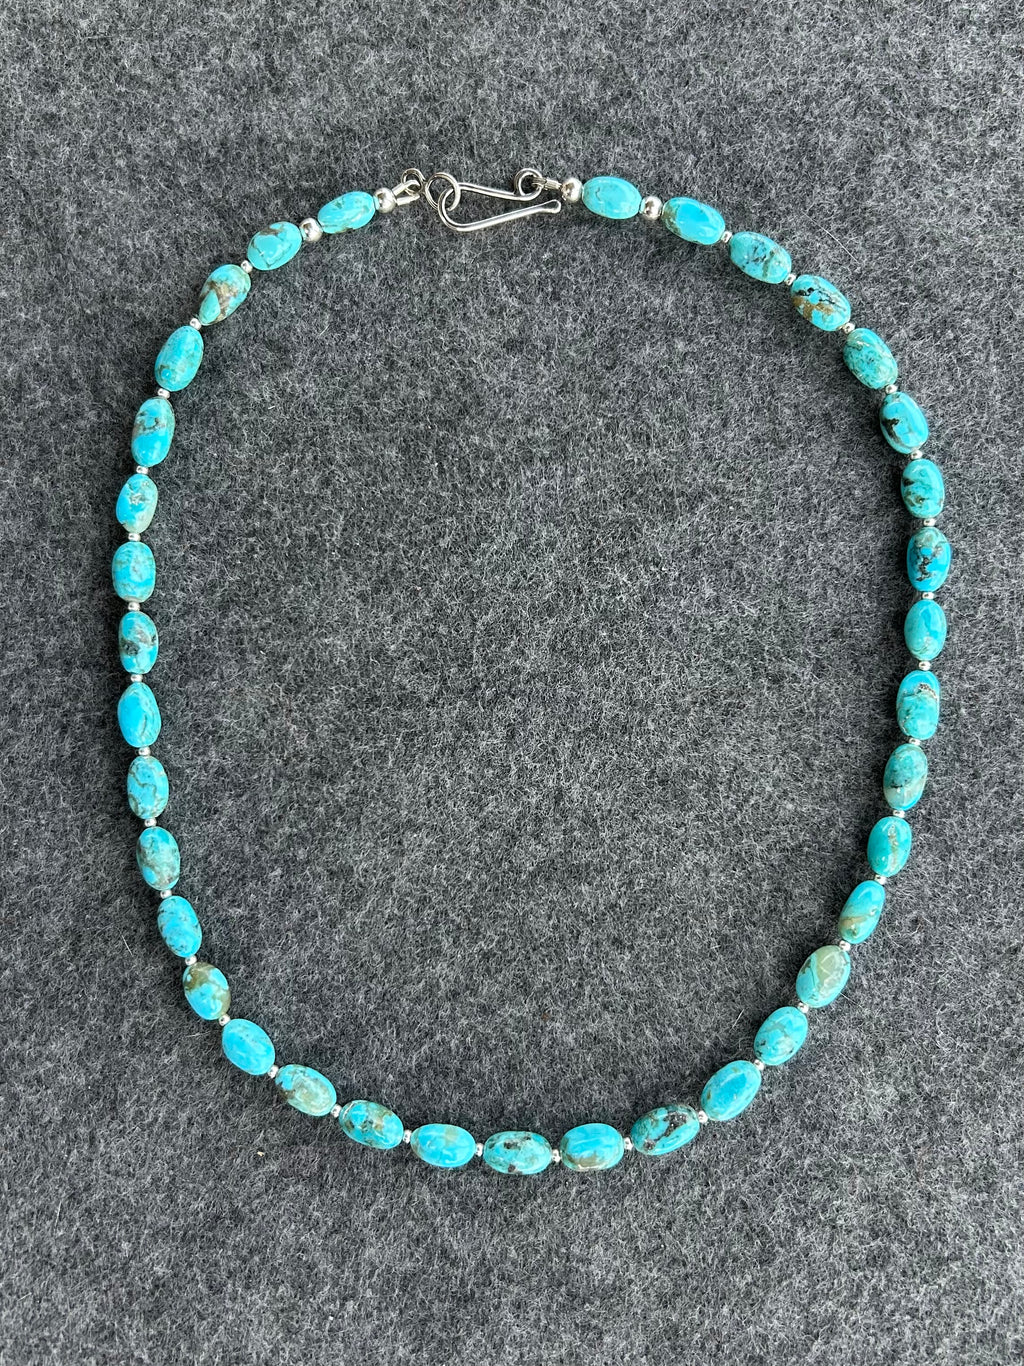 Blue Turquoise Gemstone Layering Necklace with Sterling Silver